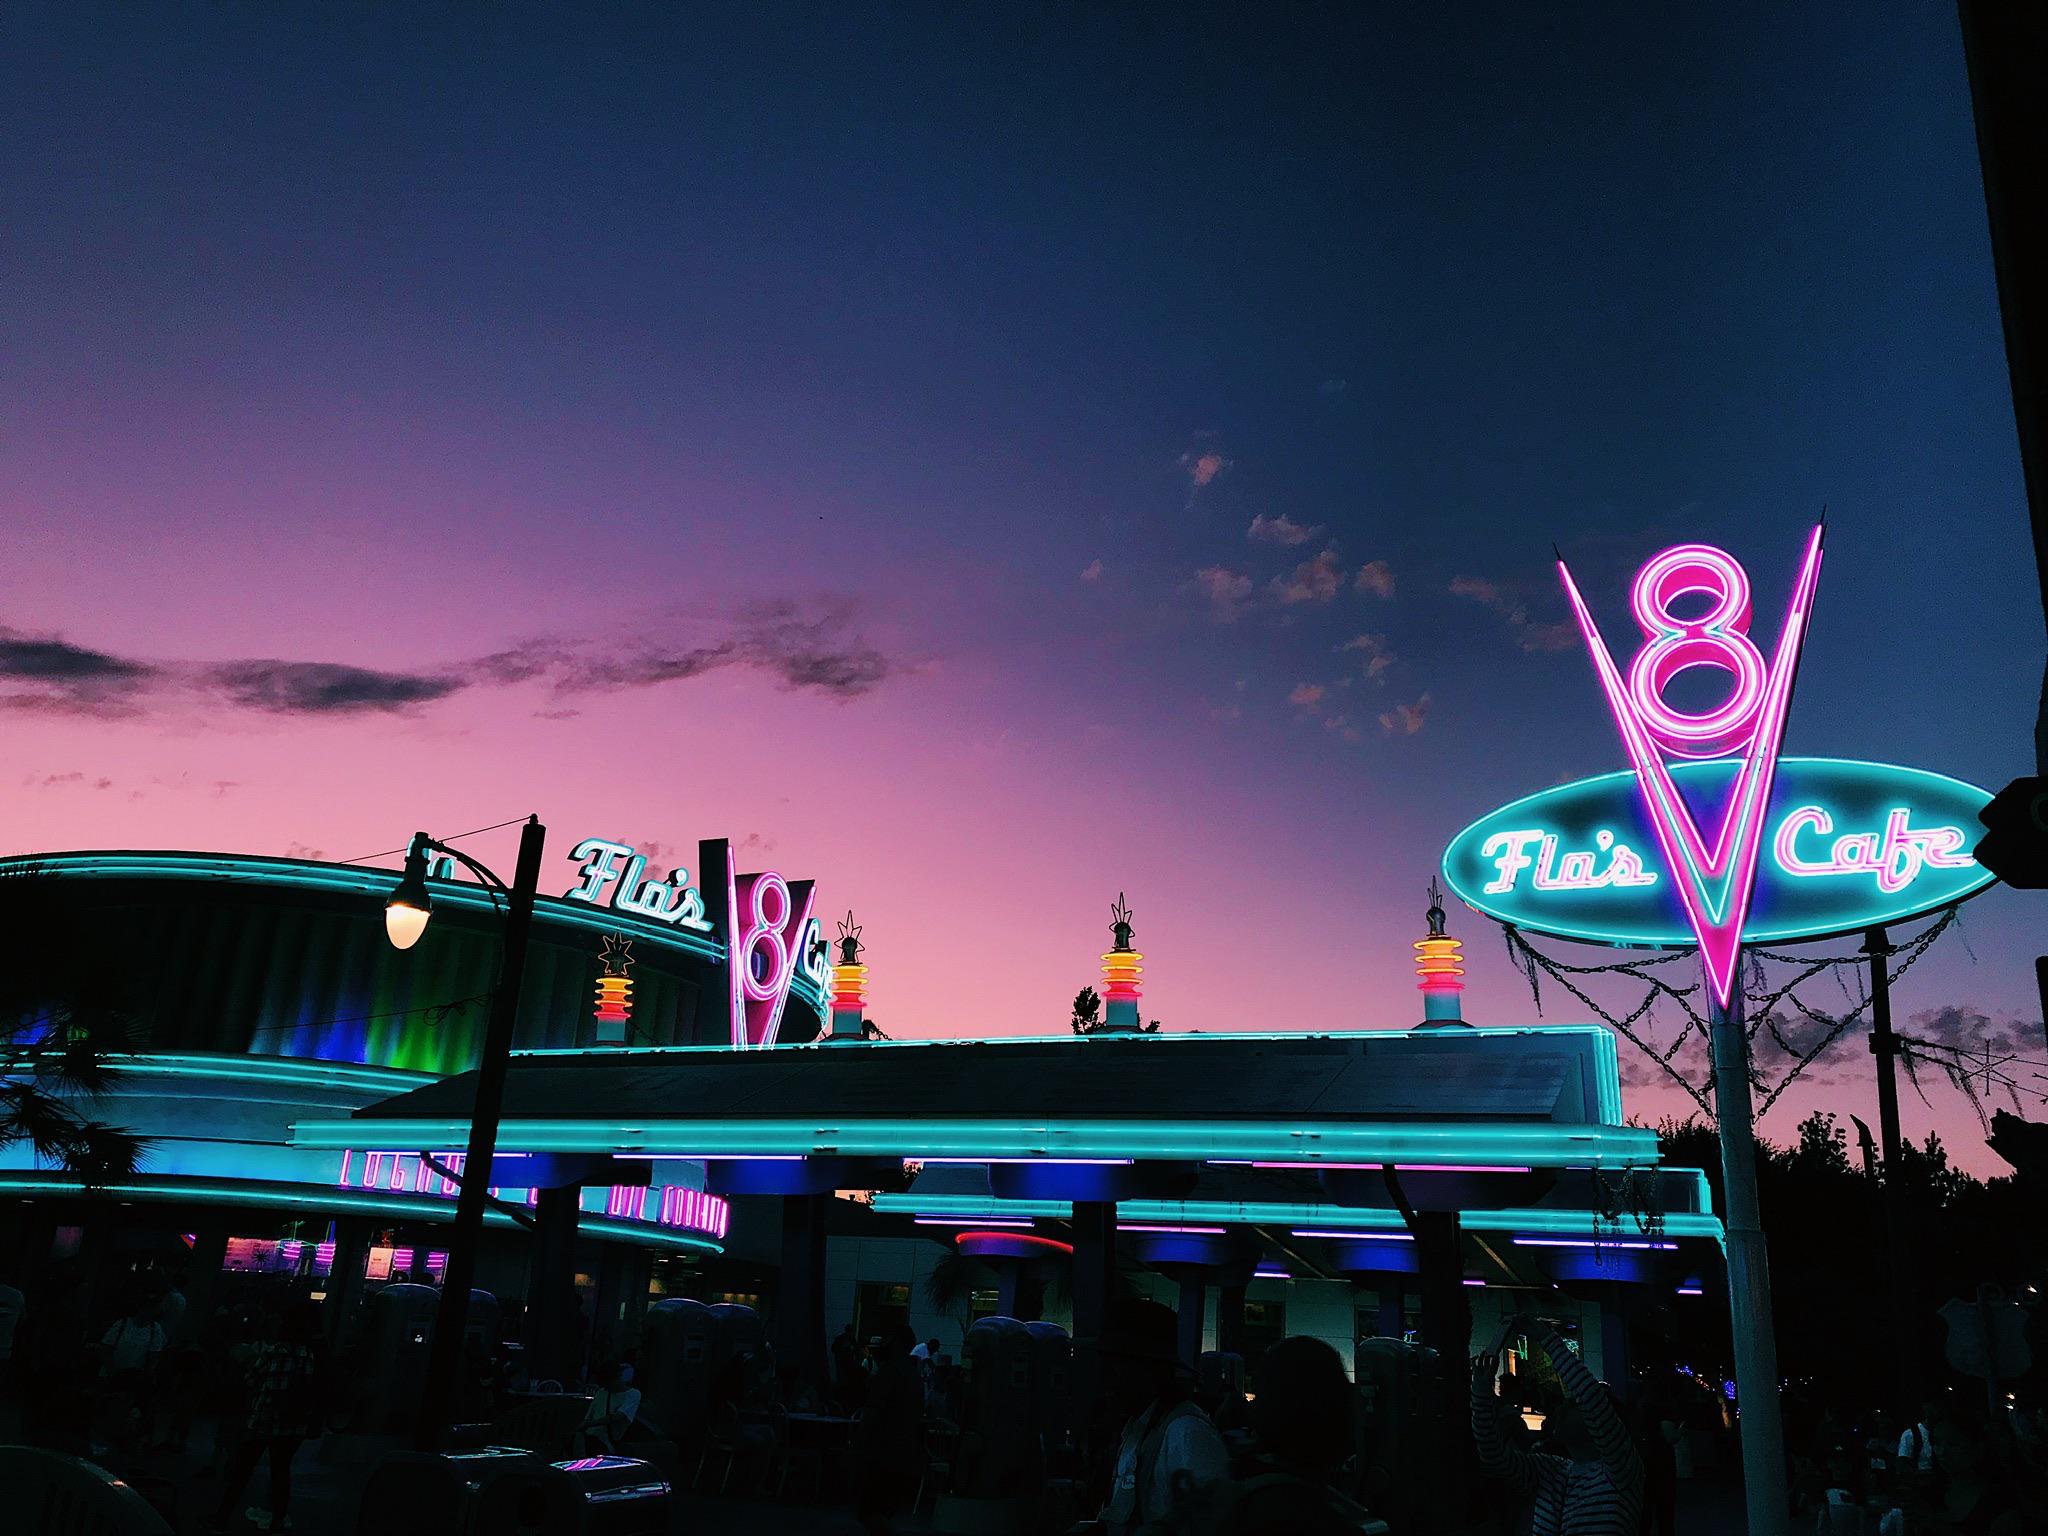 sunset in radiator springs I took this